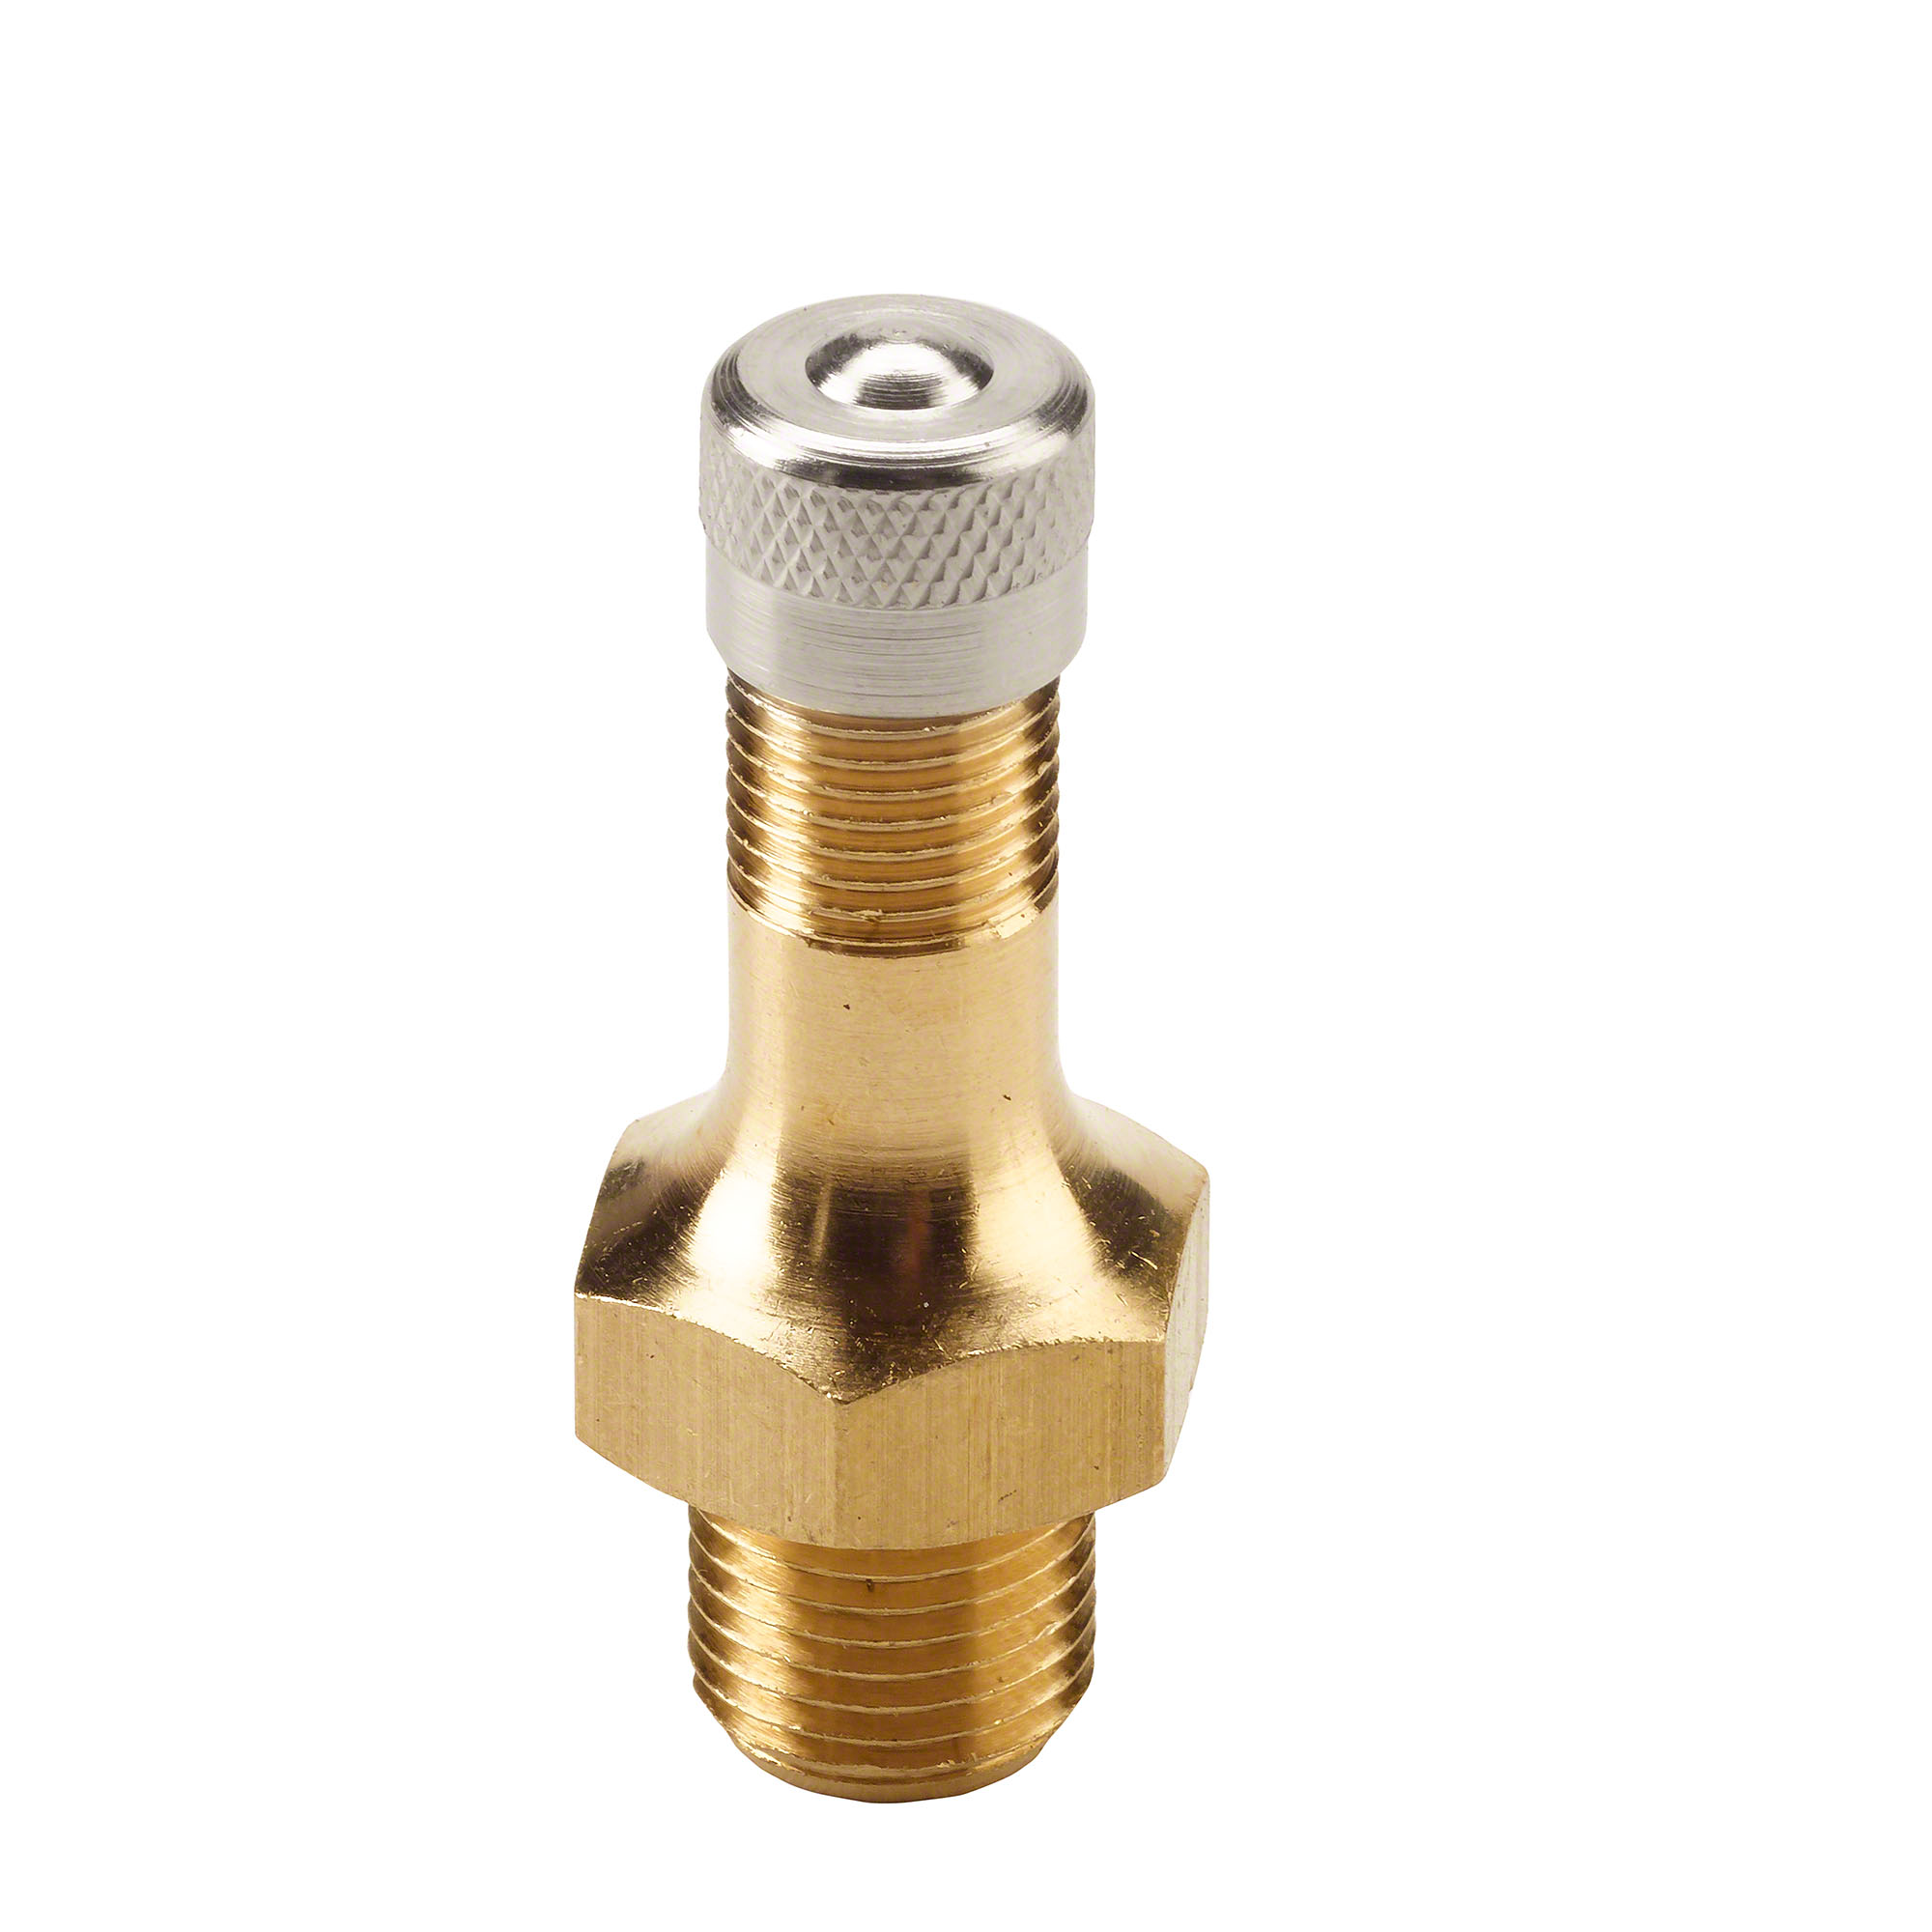 Threaded connection - Screw-in valve, G1/8”